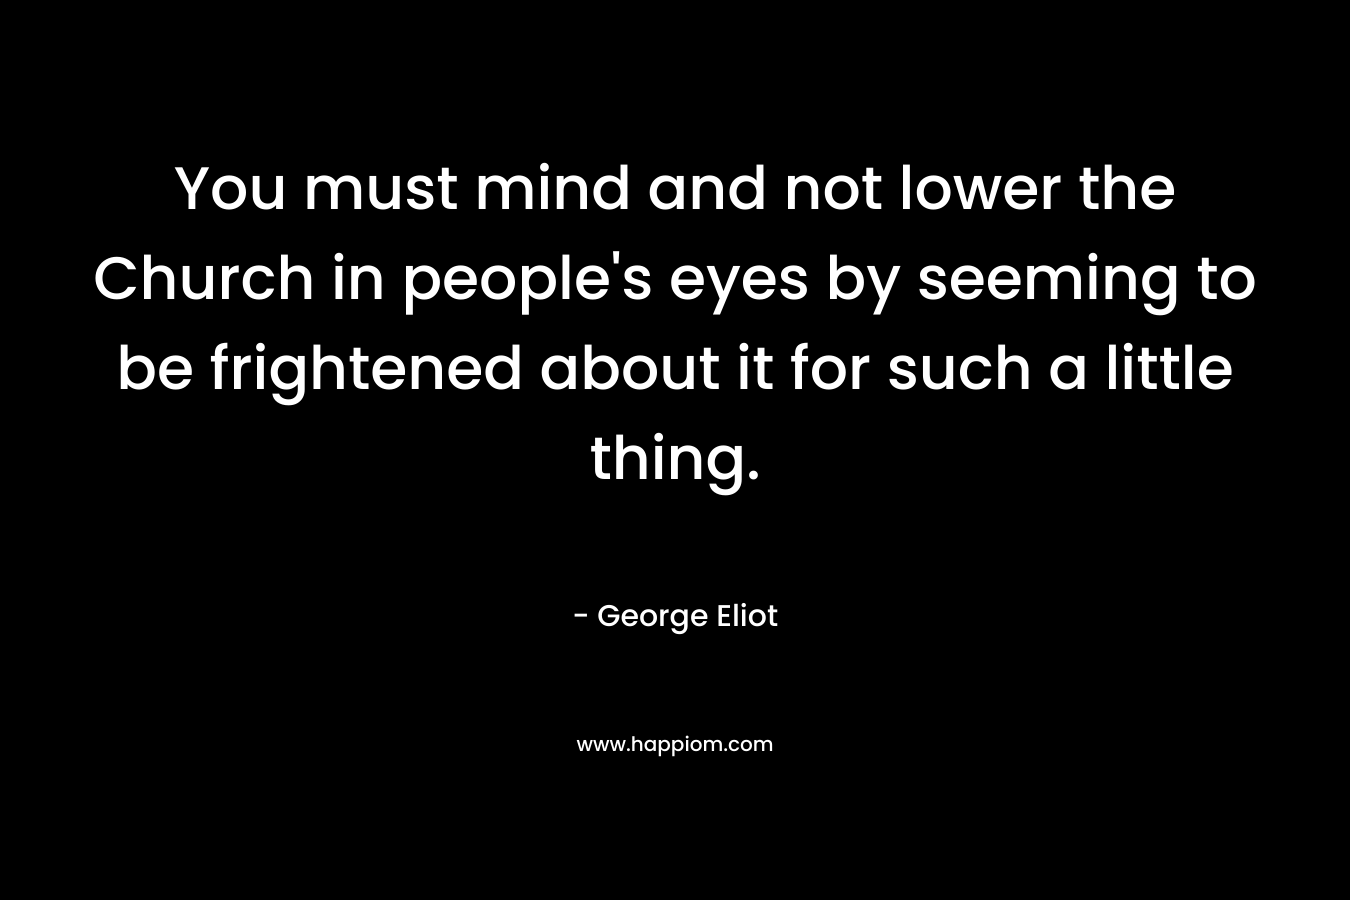 You must mind and not lower the Church in people’s eyes by seeming to be frightened about it for such a little thing. – George Eliot